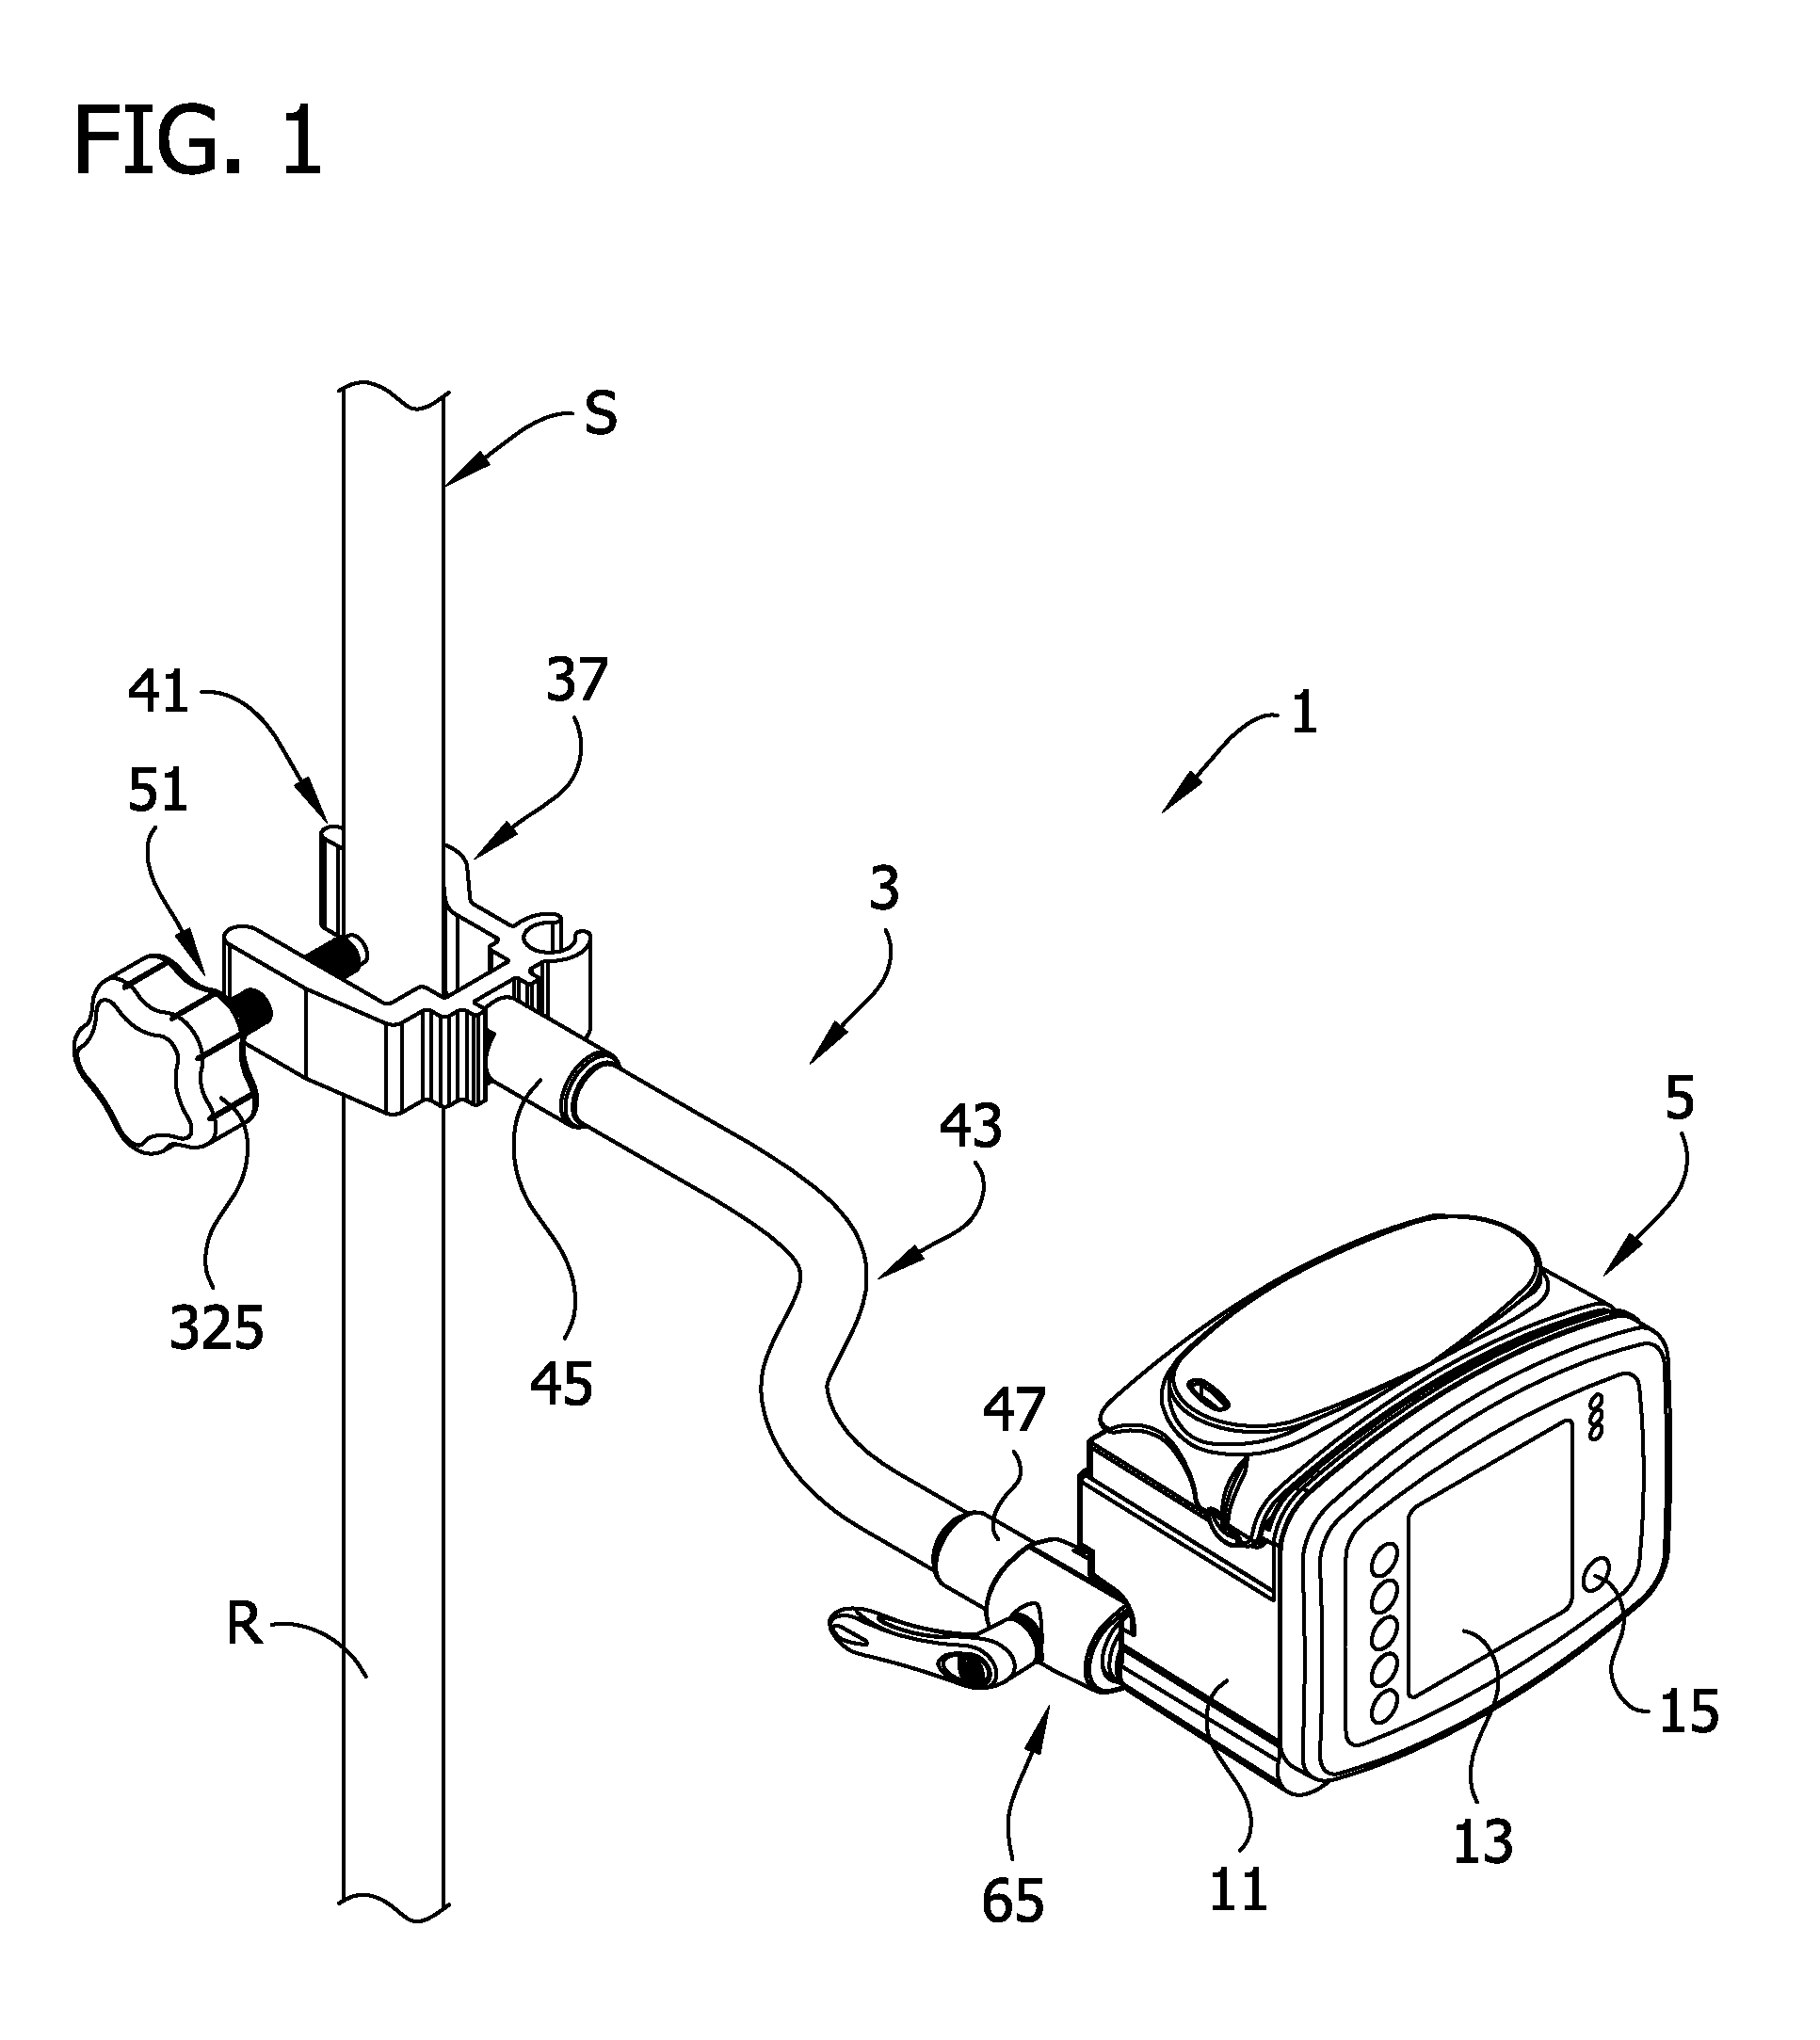 Flexible clamping apparatus for medical devices